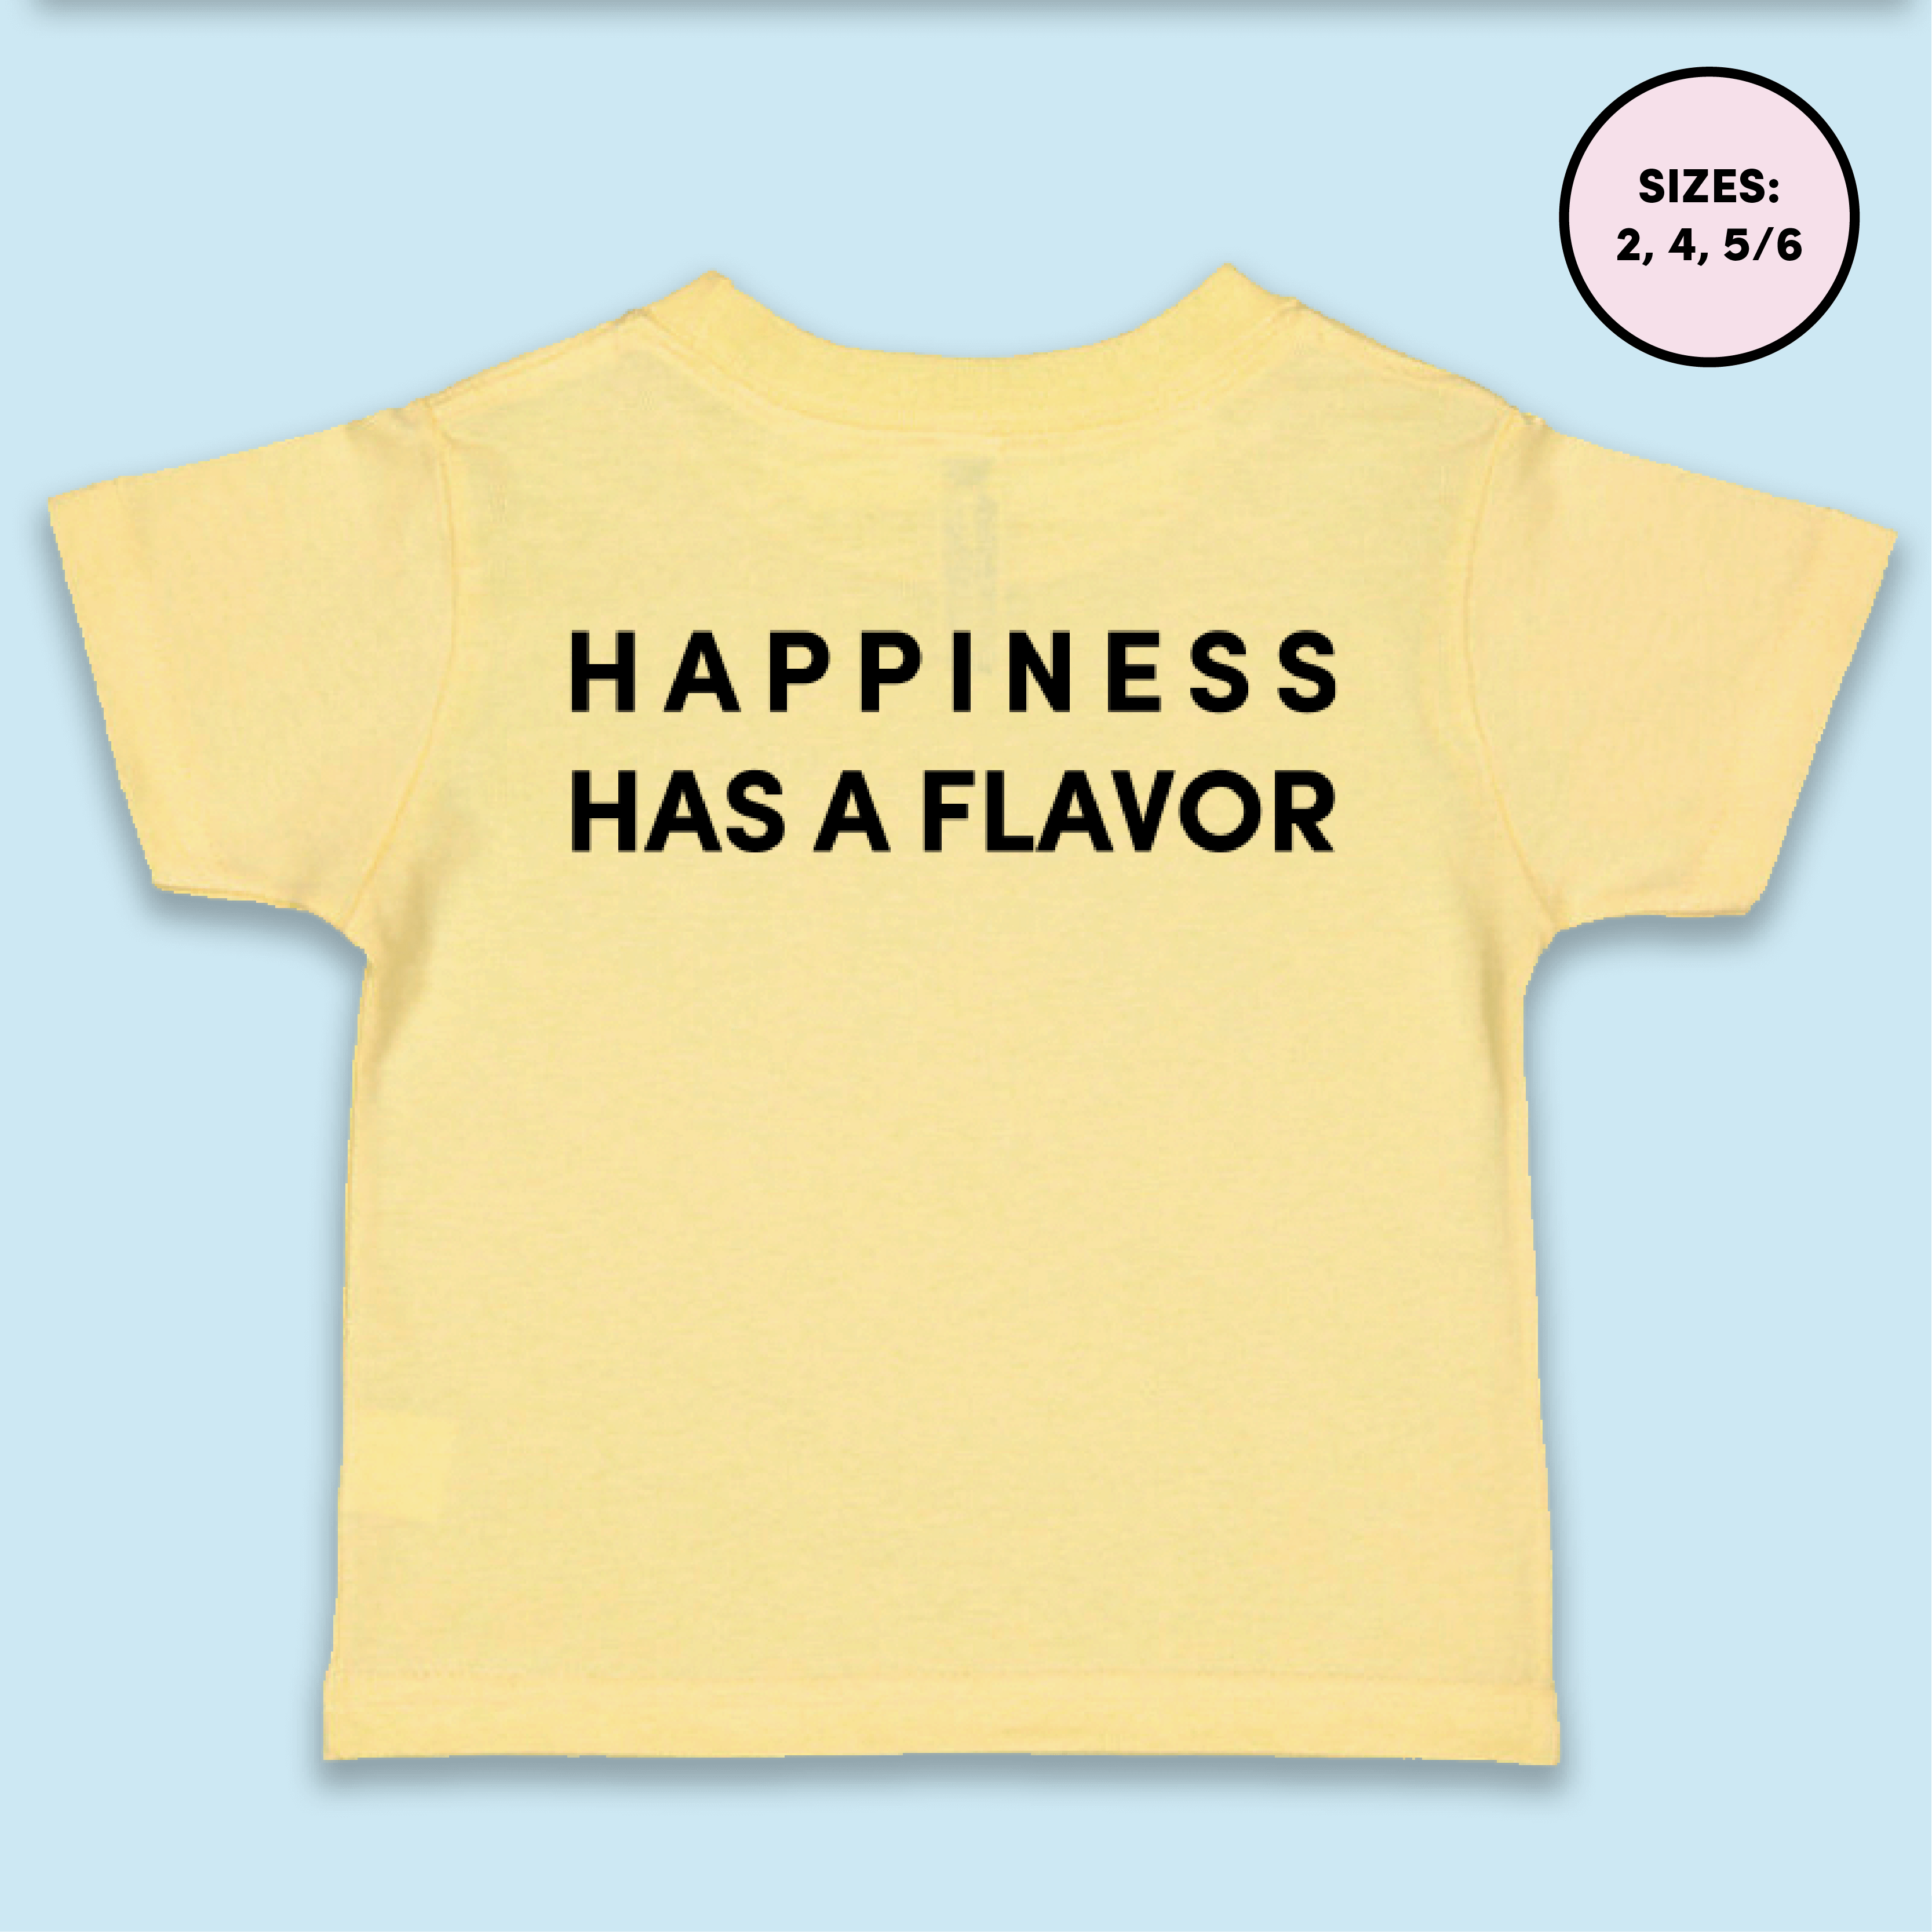 'HAPPINESS' Toddler T-shirt Image 3. 